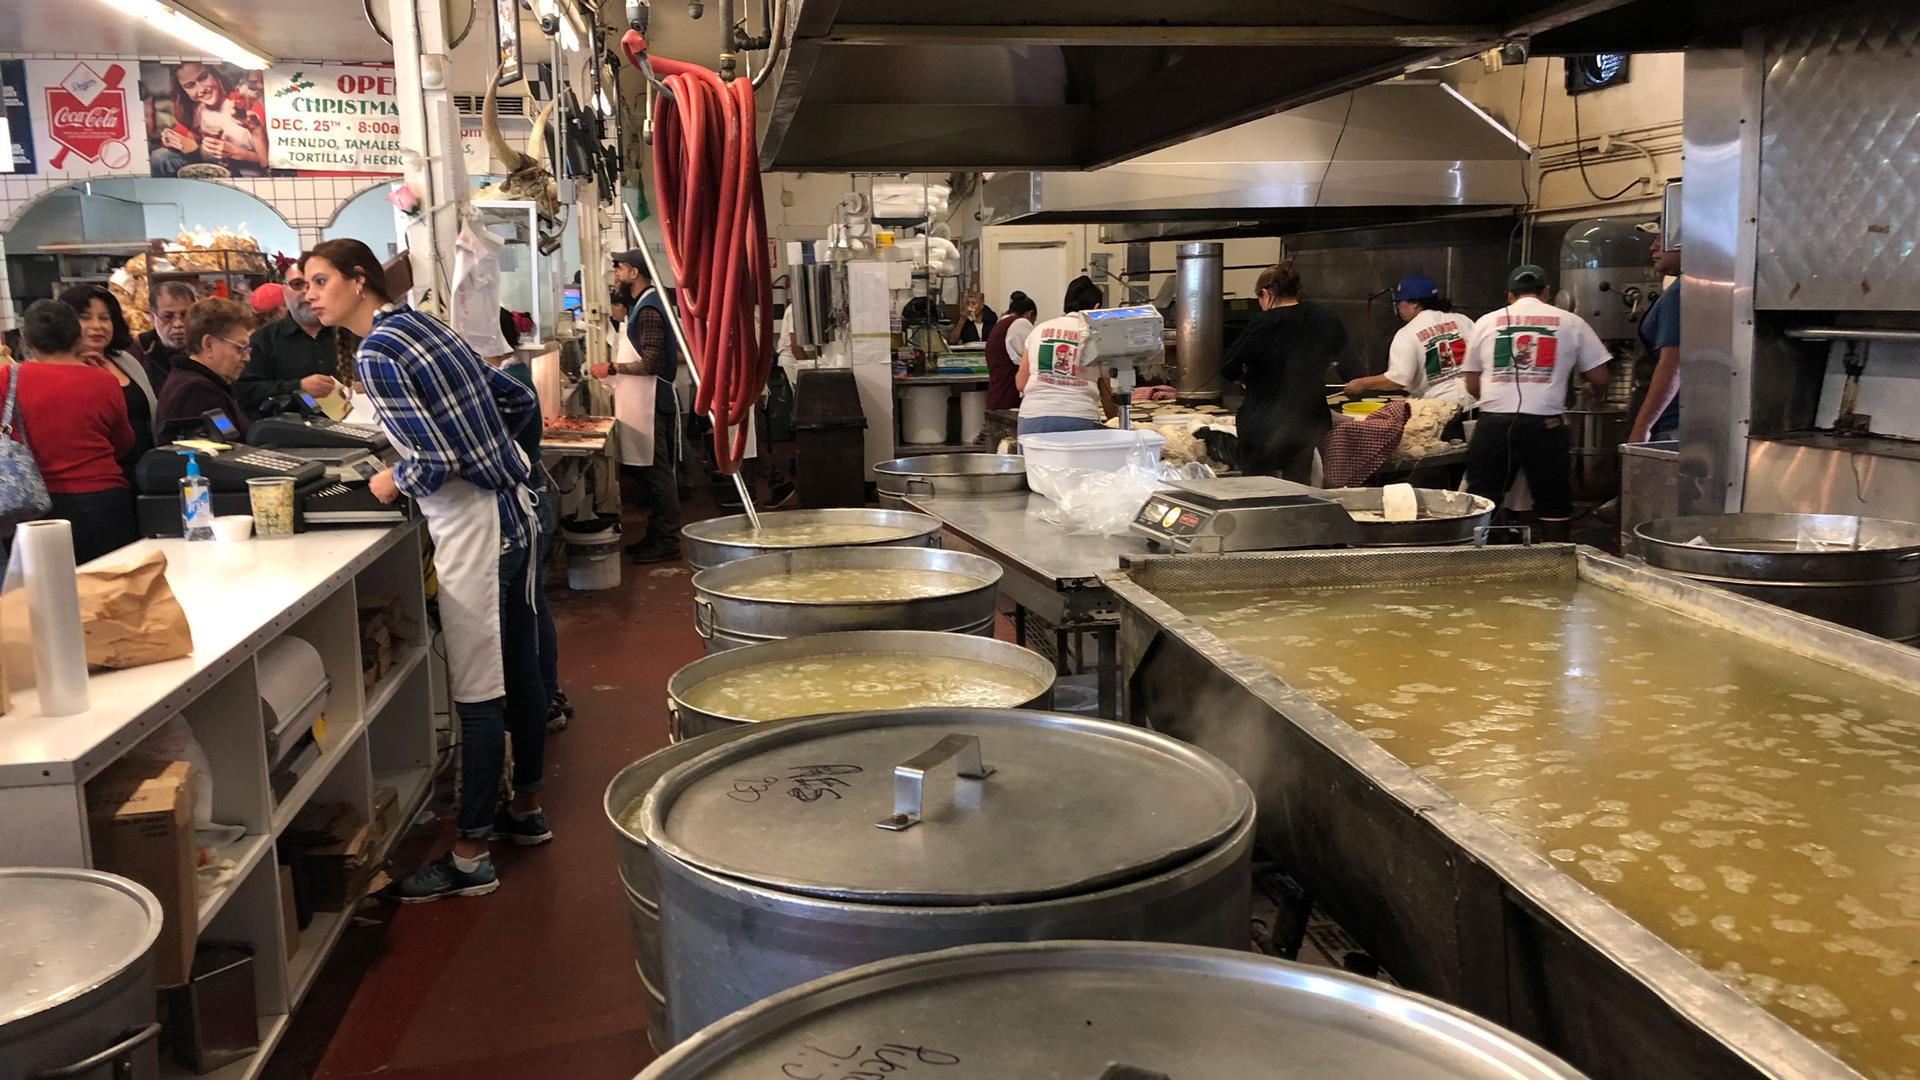 At a counter in a Latino market, customers wait to buy food while workers cook in the back. In the foreground are huge steel pots. 